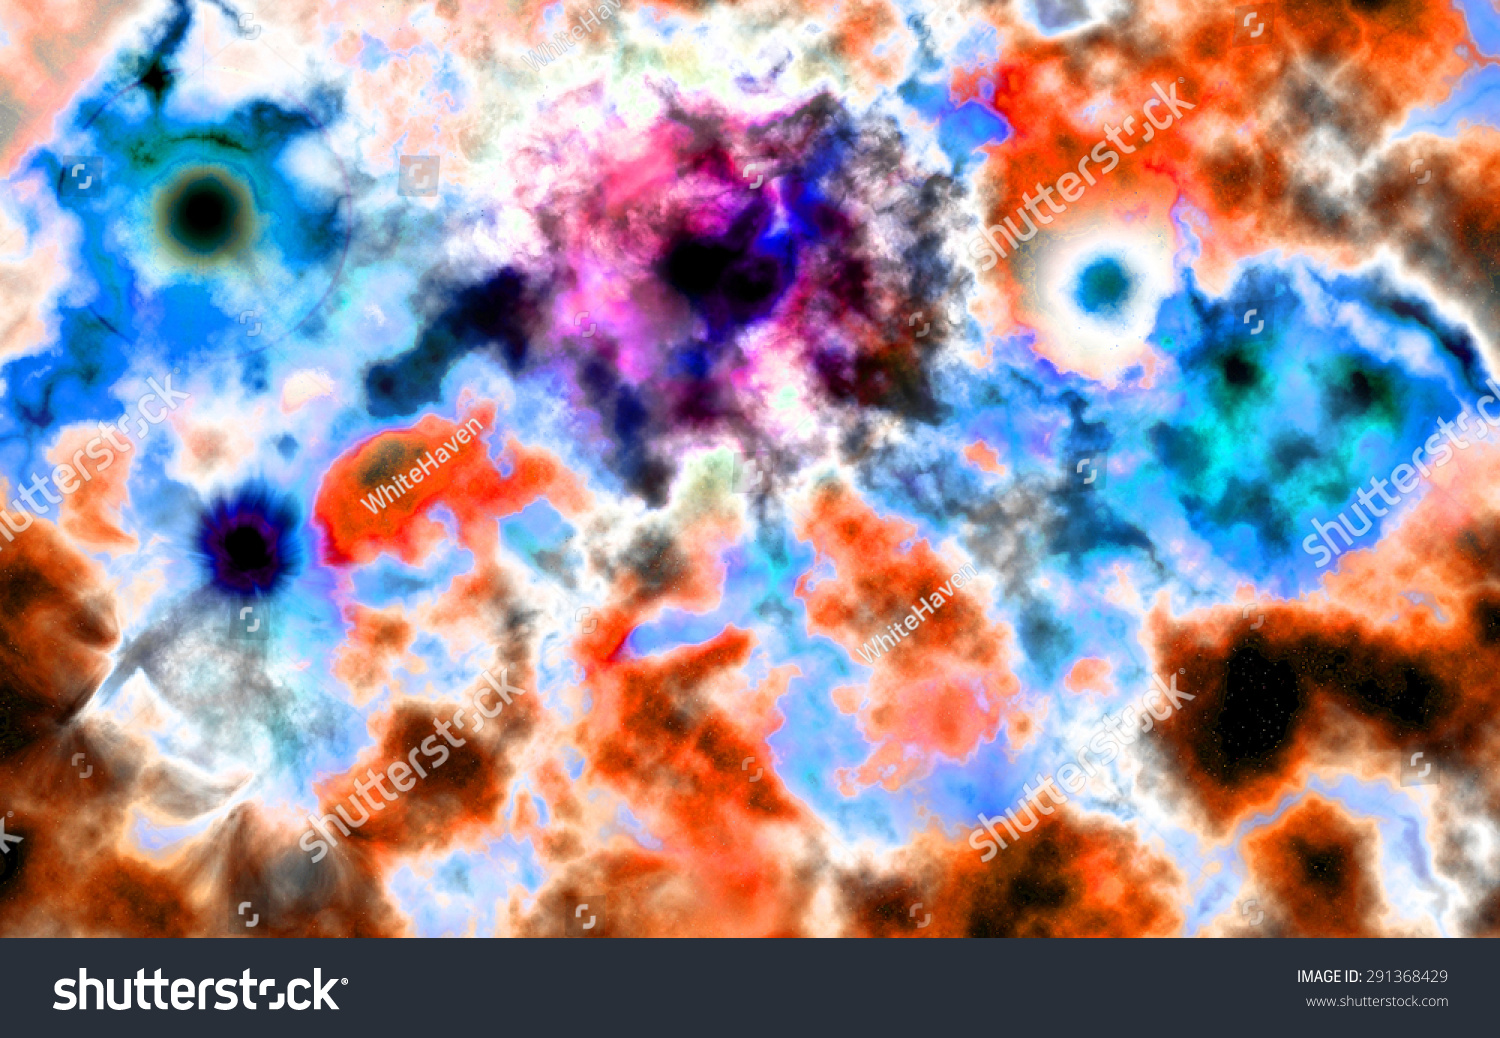 High Resolution Space Background Vividly Colored Stock Illustration 291368429 Shutterstock 6642